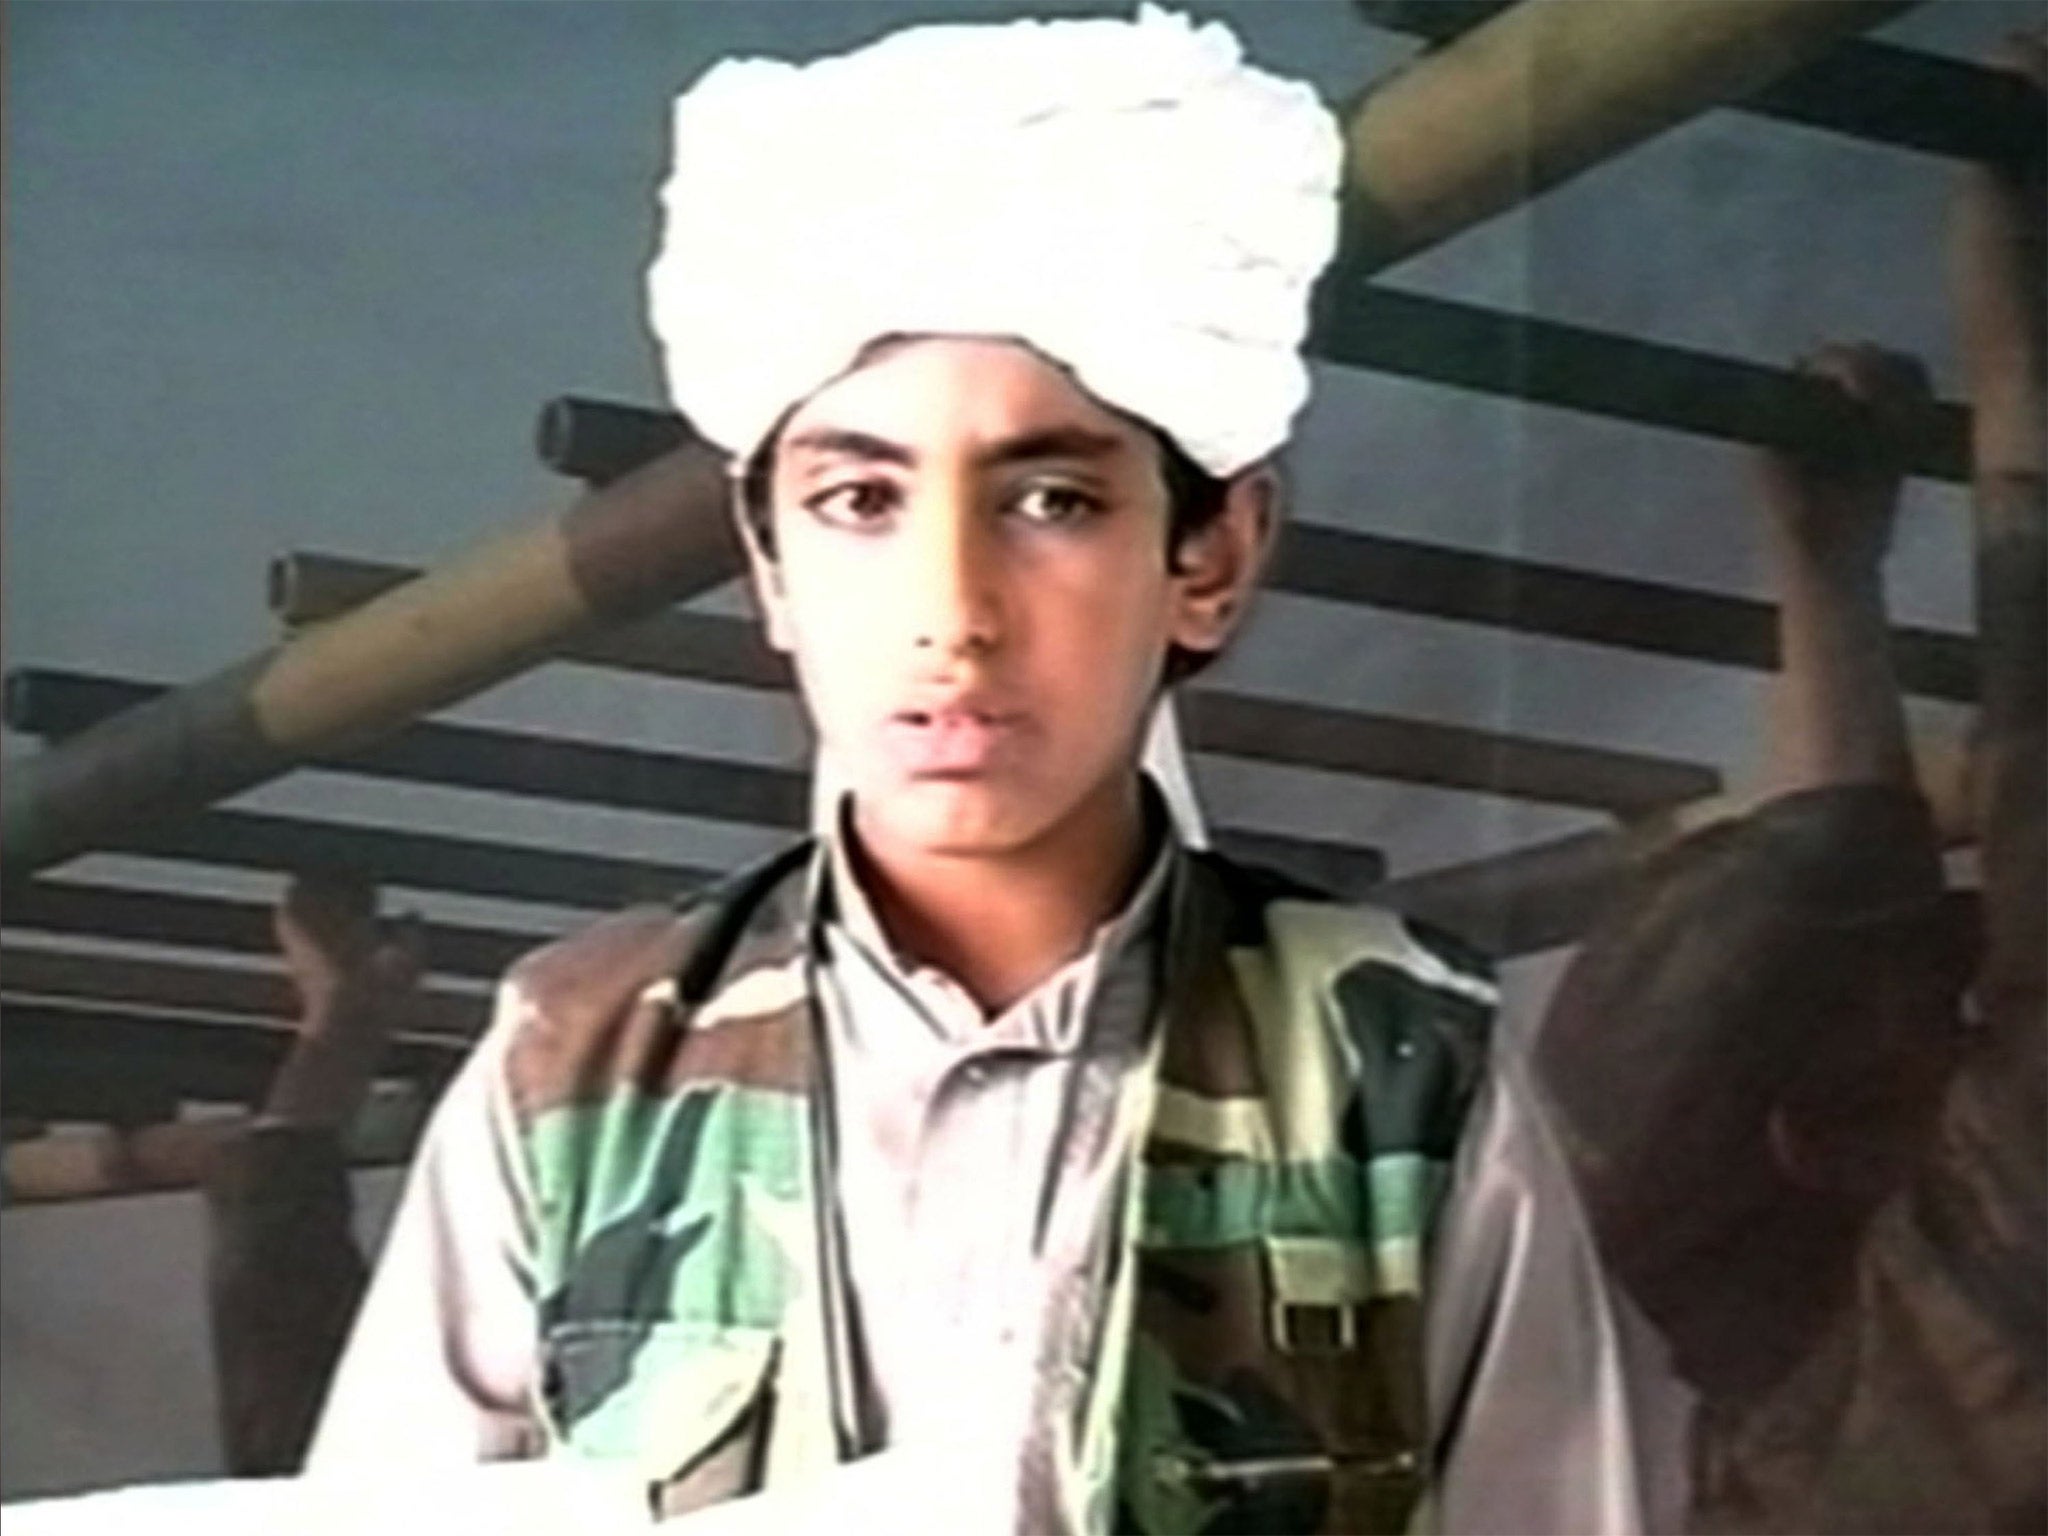 Bin Laden hoped his son Hamza would eventually succeed him (file image)